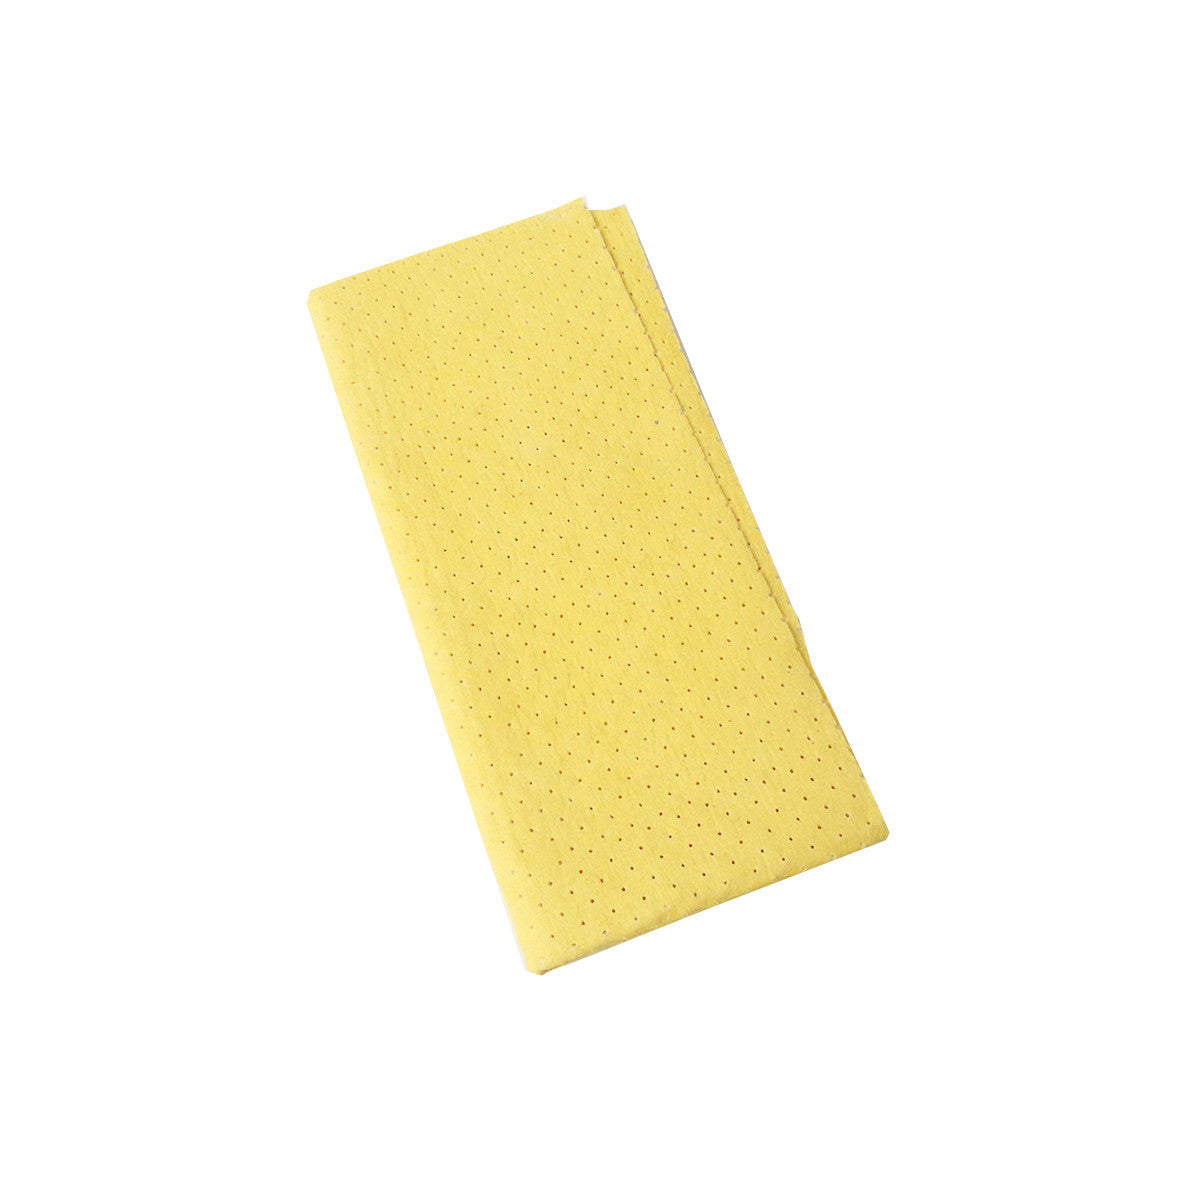 1/2PCS For hobot 188 168 198 388 Window cleaner wipes Puruikai Cleaning  cloth PhoReal windows